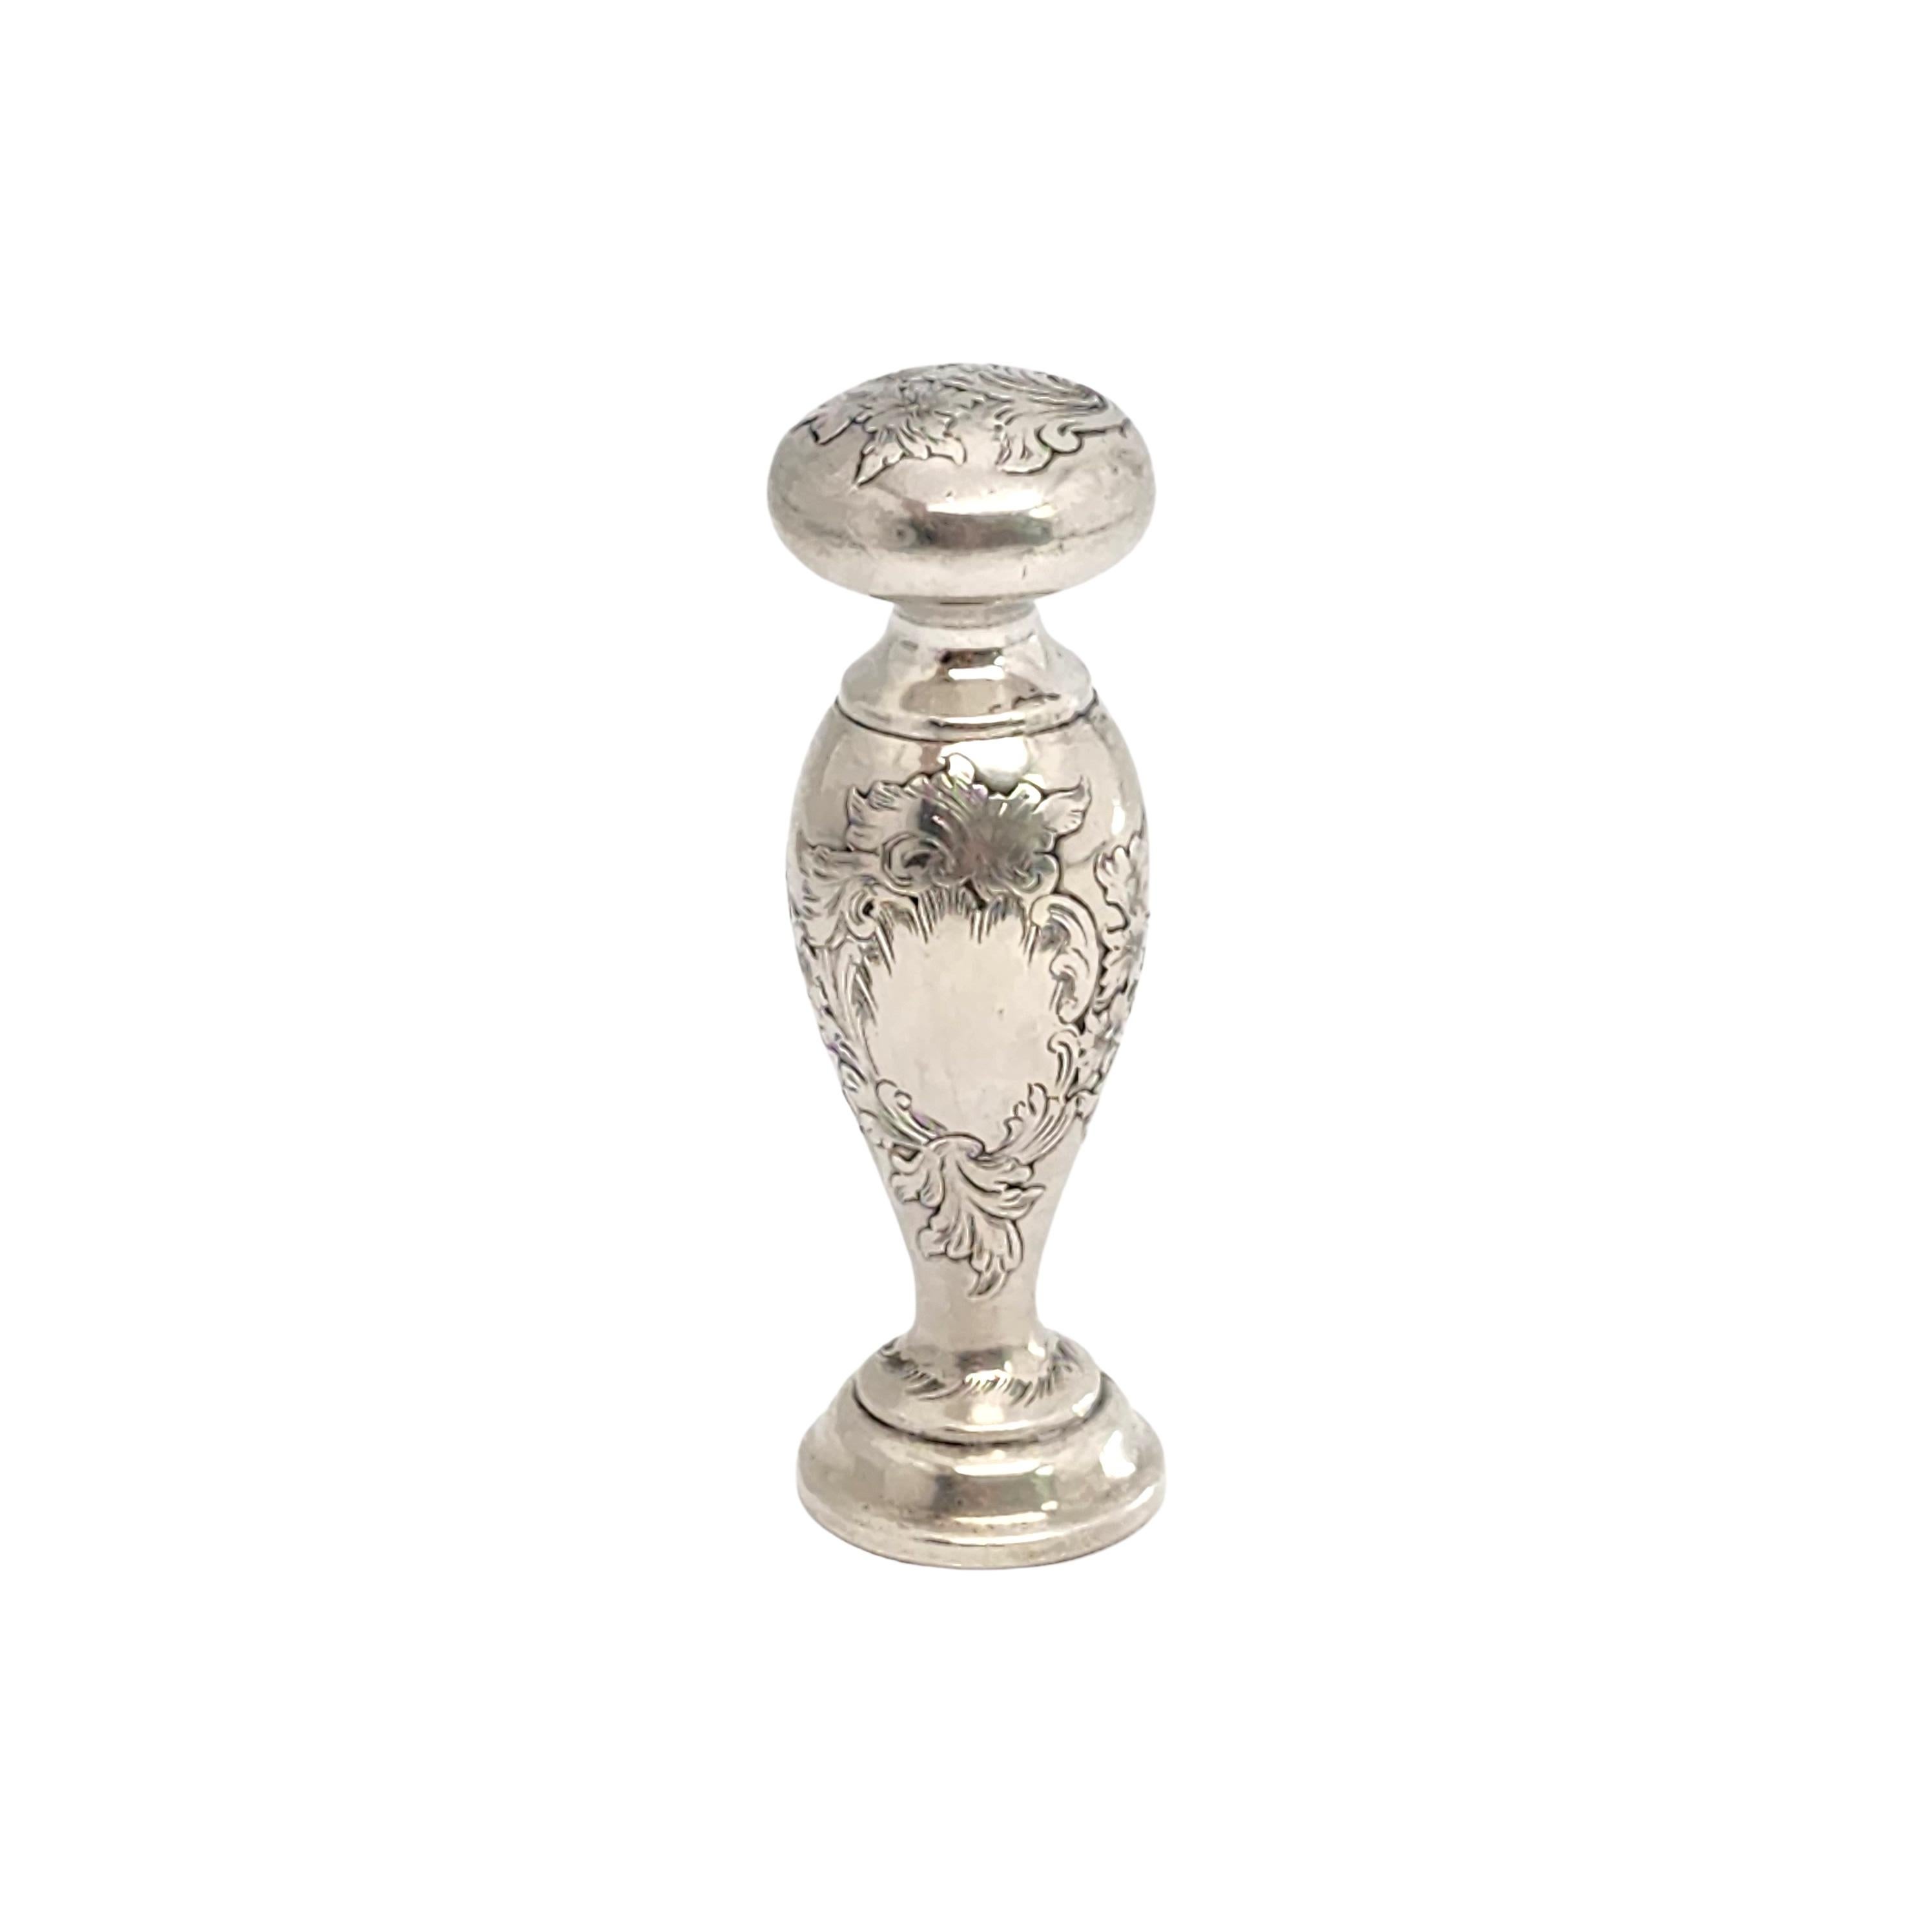 Sterling silver wax seal stamp by Gorham.

No monogram

Bulbous designed stamp with a flower and leaf etched design on top, an an etched scroll, flower and leaf design around a blank cartouche. Plan round stamp bottom.

Measures approx 2 3/4